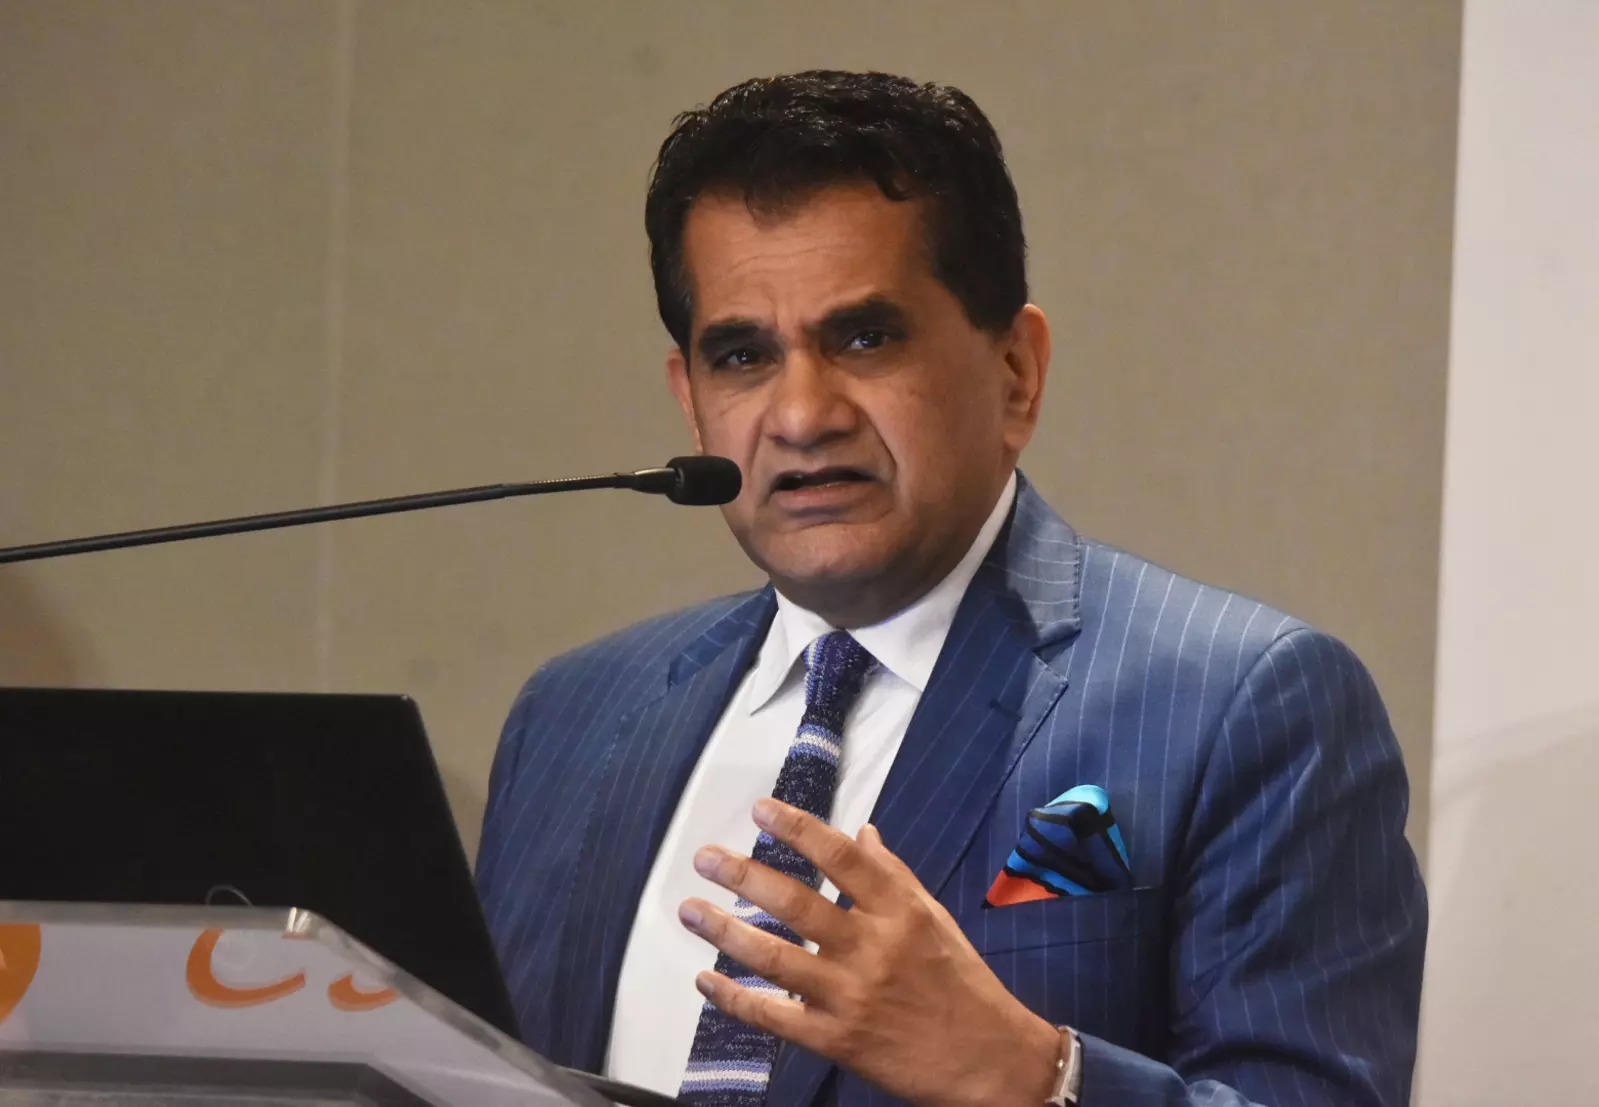 India should be among 1st nations to industrialise without carbonizing the world: Amitabh Kant